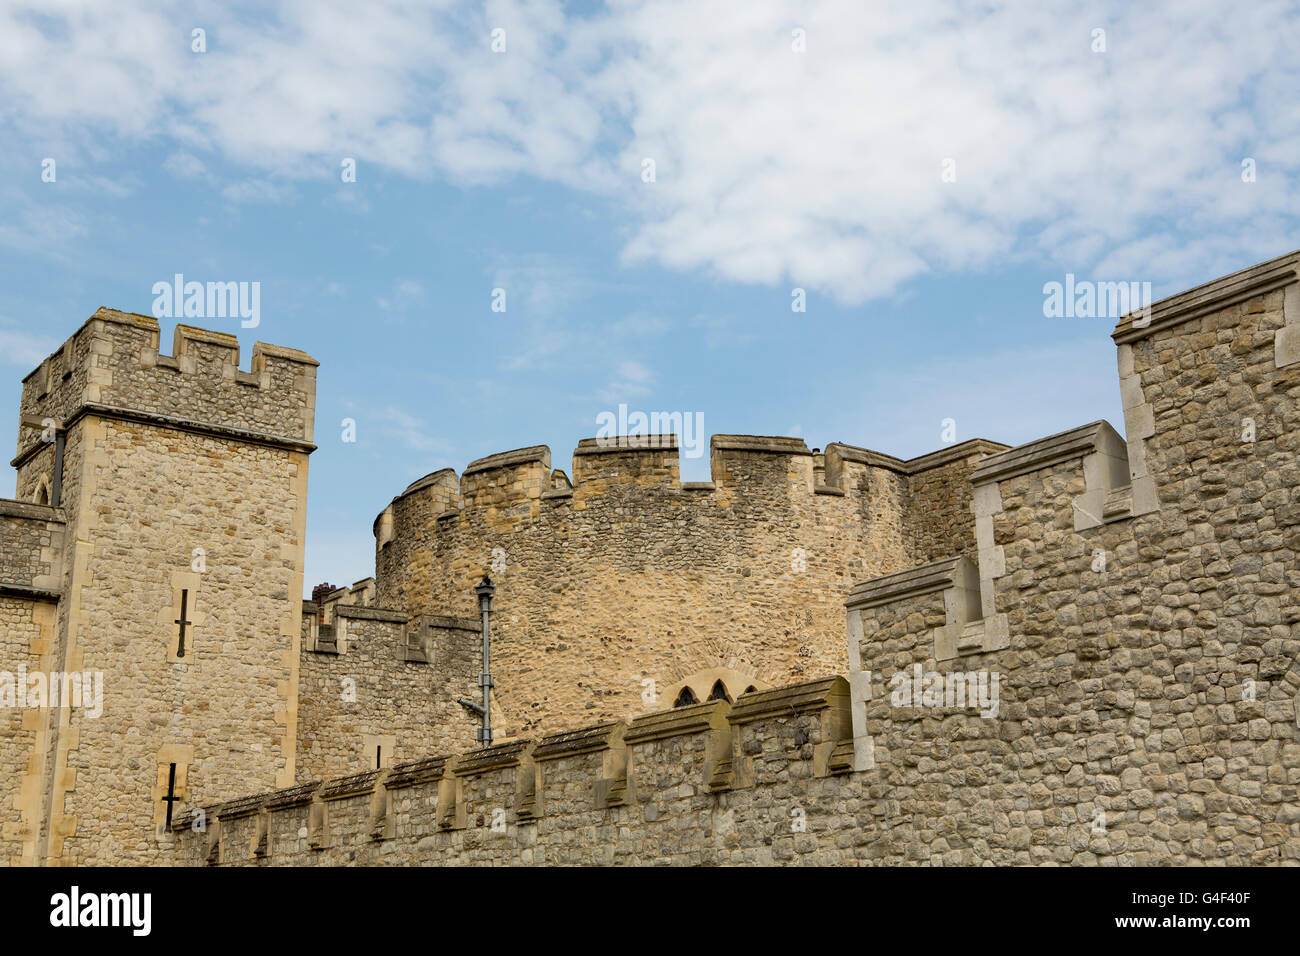 Old Stone castle walls with ramparts and lookouts. Stock Photo